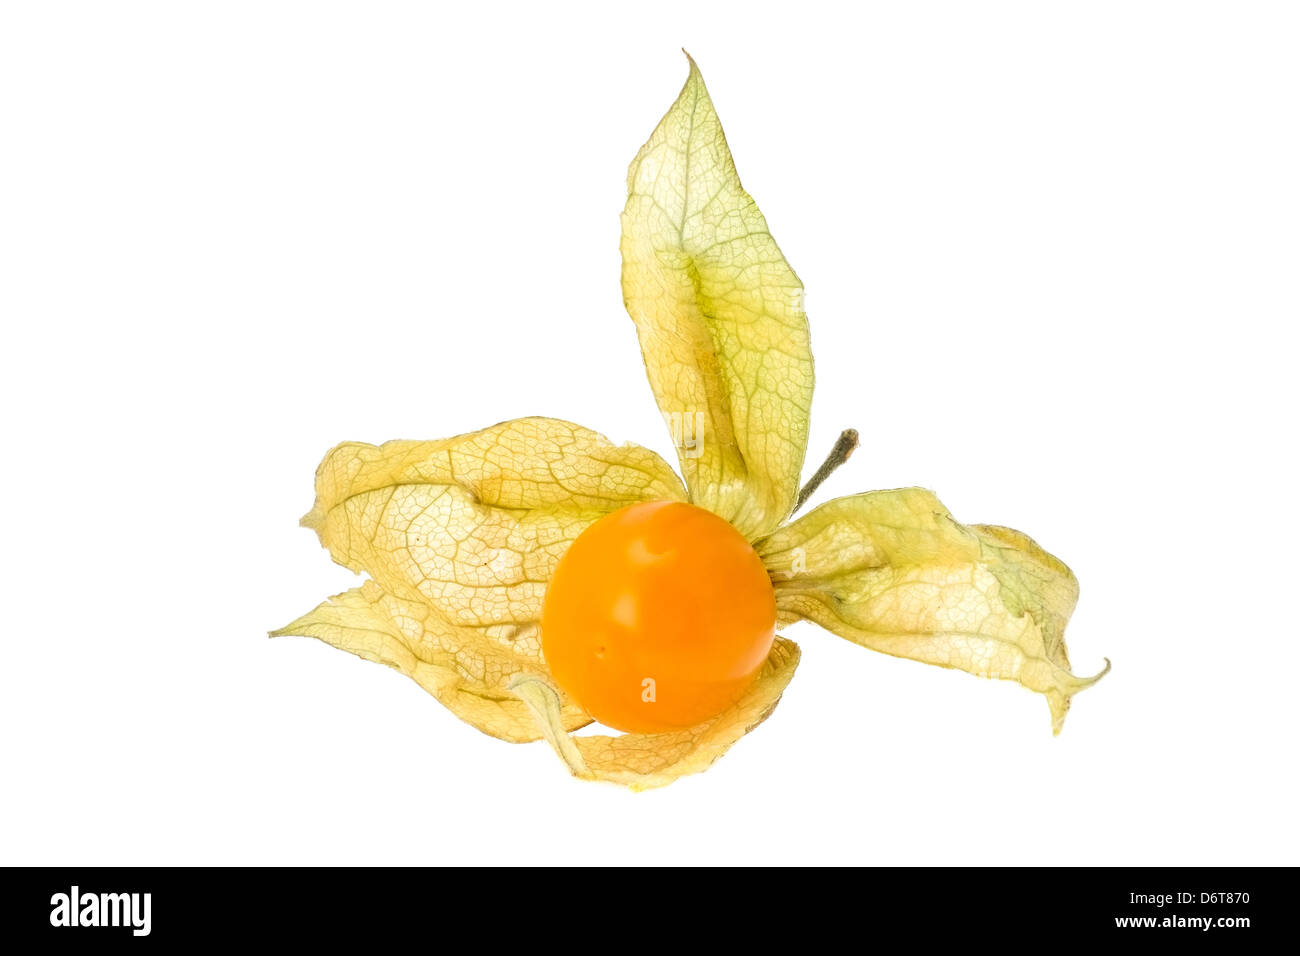 Physalis also known as a Winter Cherry or 'Love in a cage' - studio shot with a shallow depth of field and a white background. Stock Photo